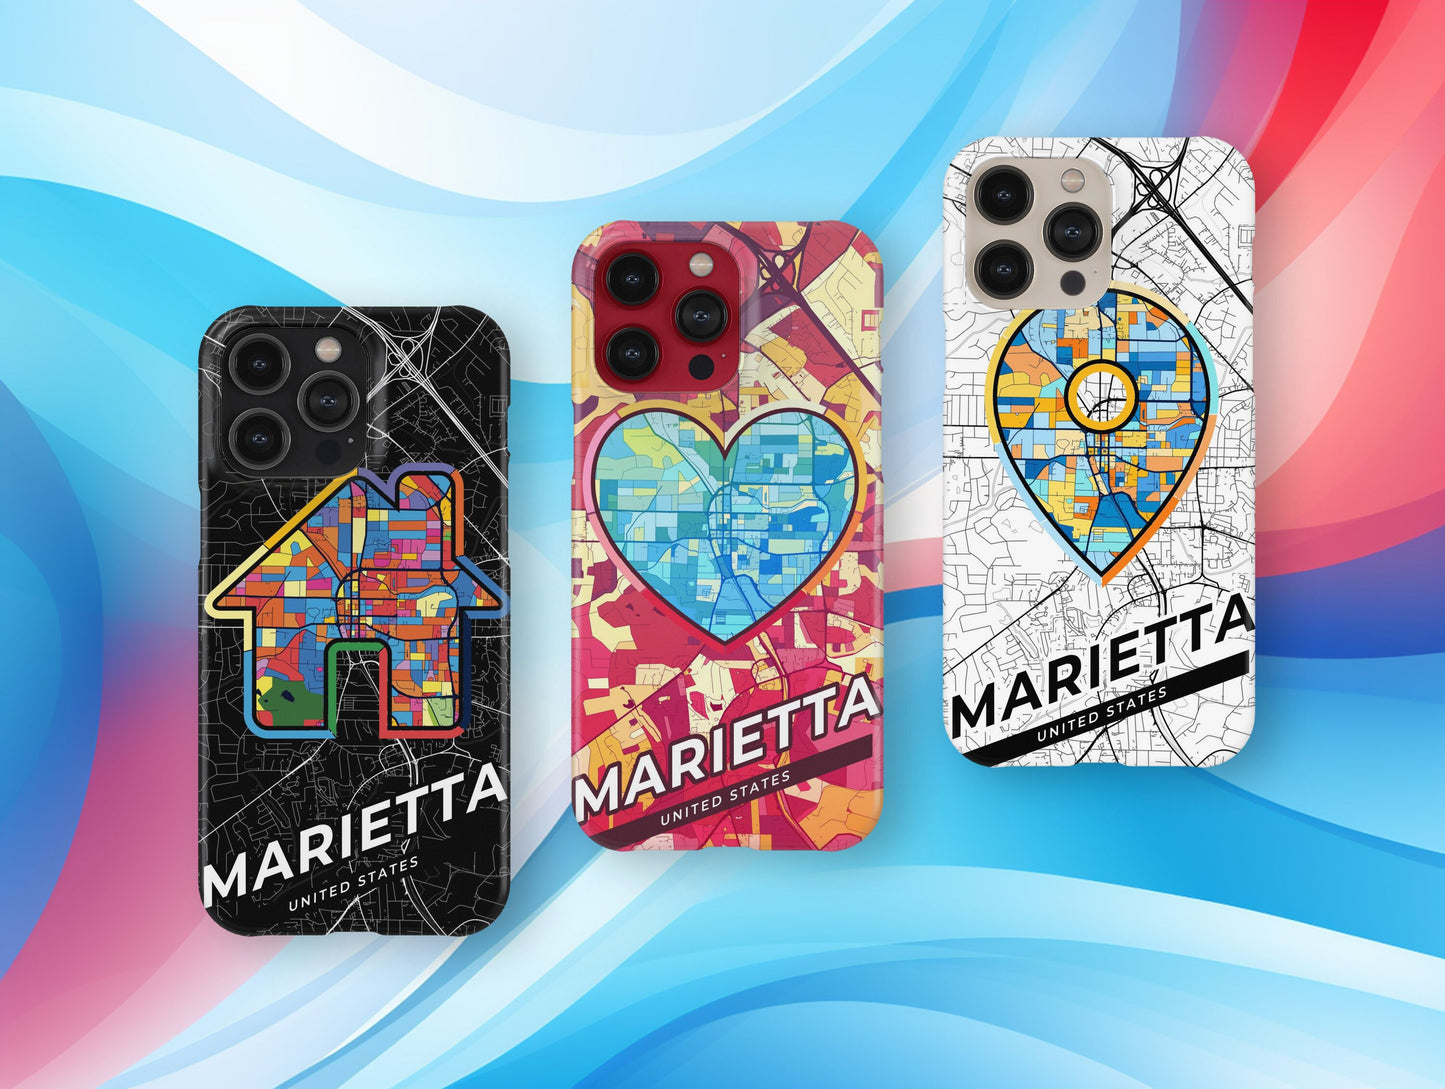 Marietta Georgia slim phone case with colorful icon. Birthday, wedding or housewarming gift. Couple match cases.